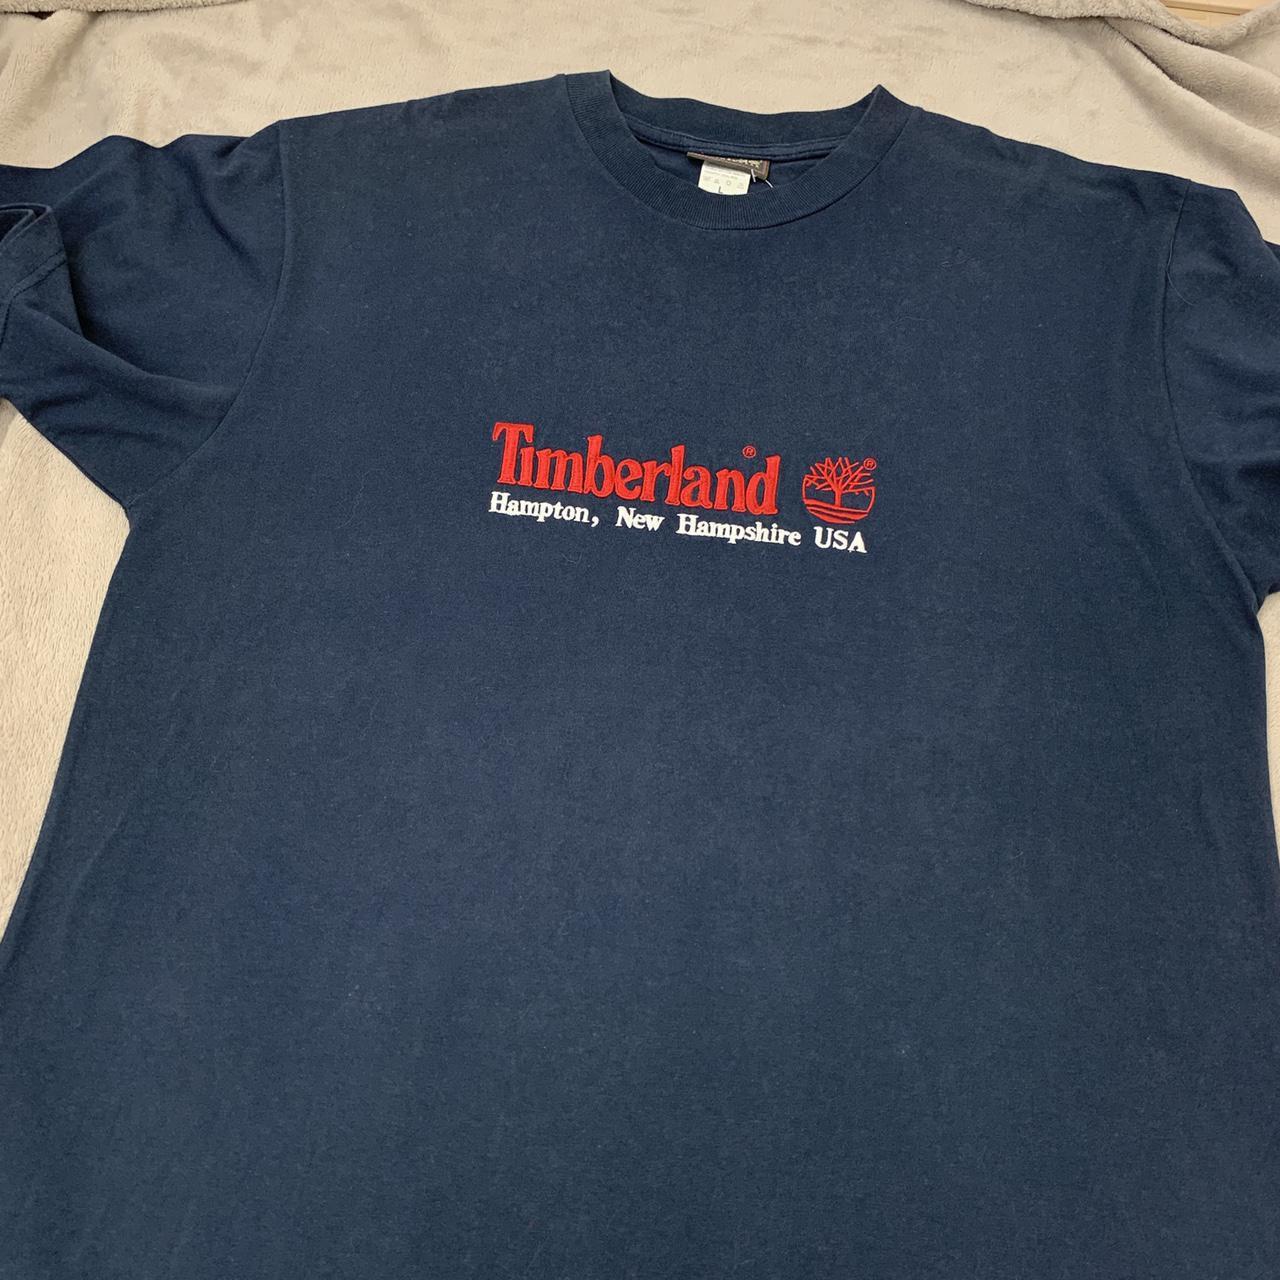 Product Image 4 - Vintage Timberland t shirt

Has faint